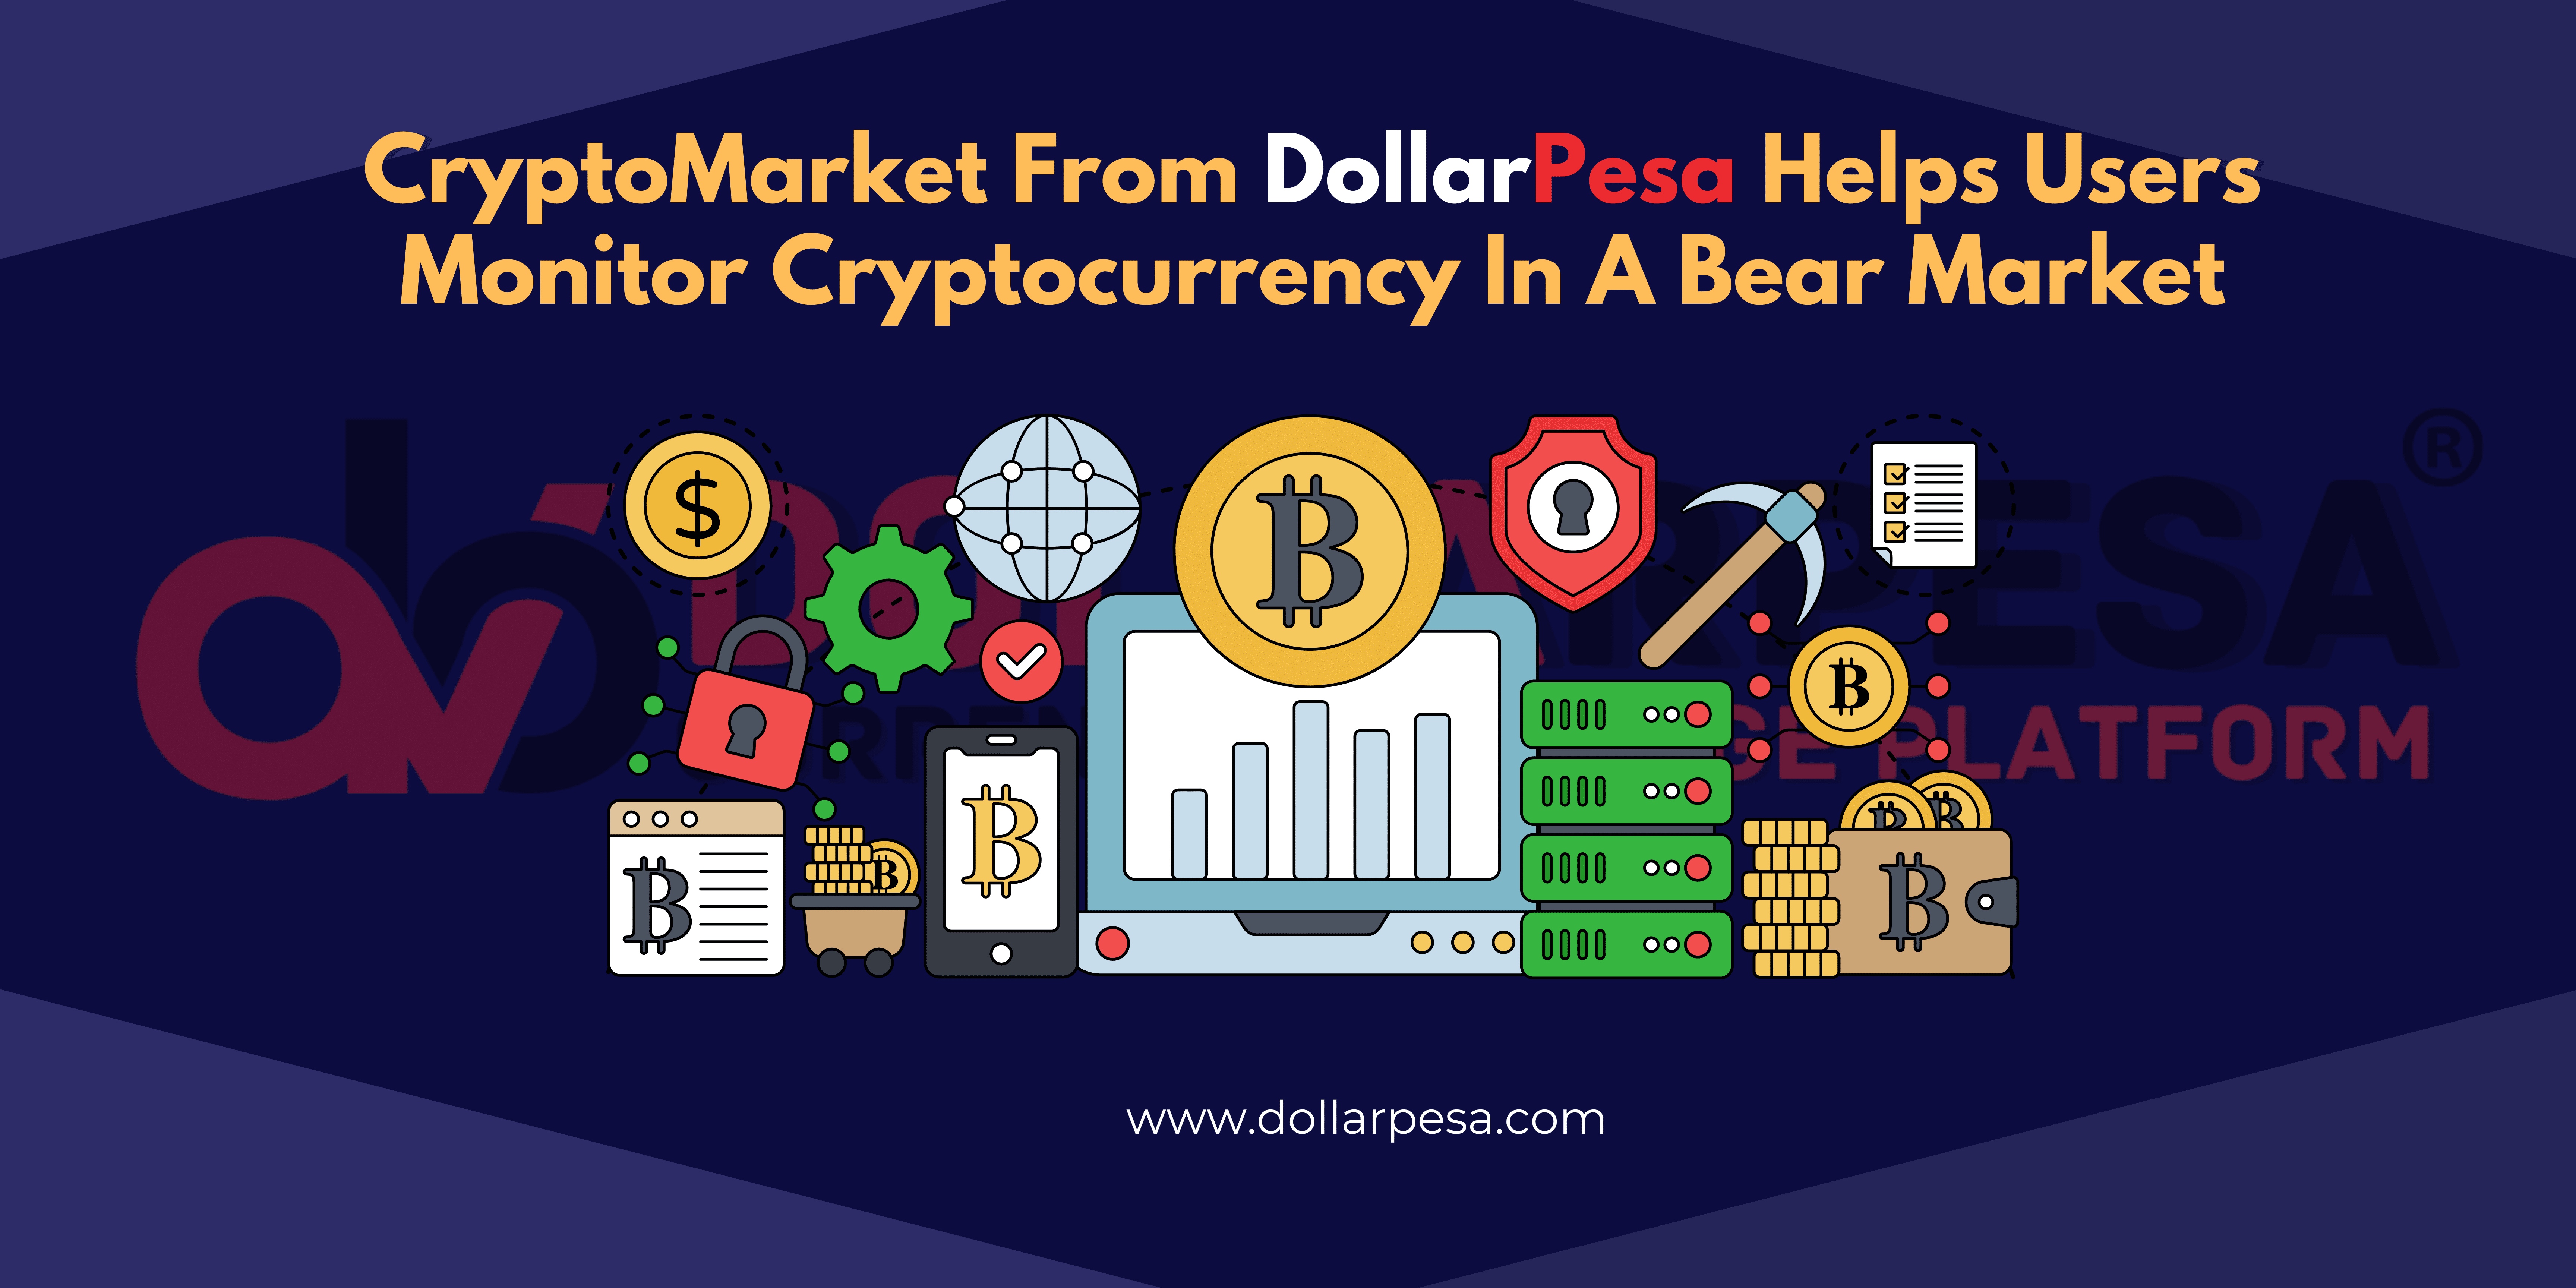 Cryptomarket From Dollarpesa Helps Users Monitor Cryptocurrency In A Bear Market